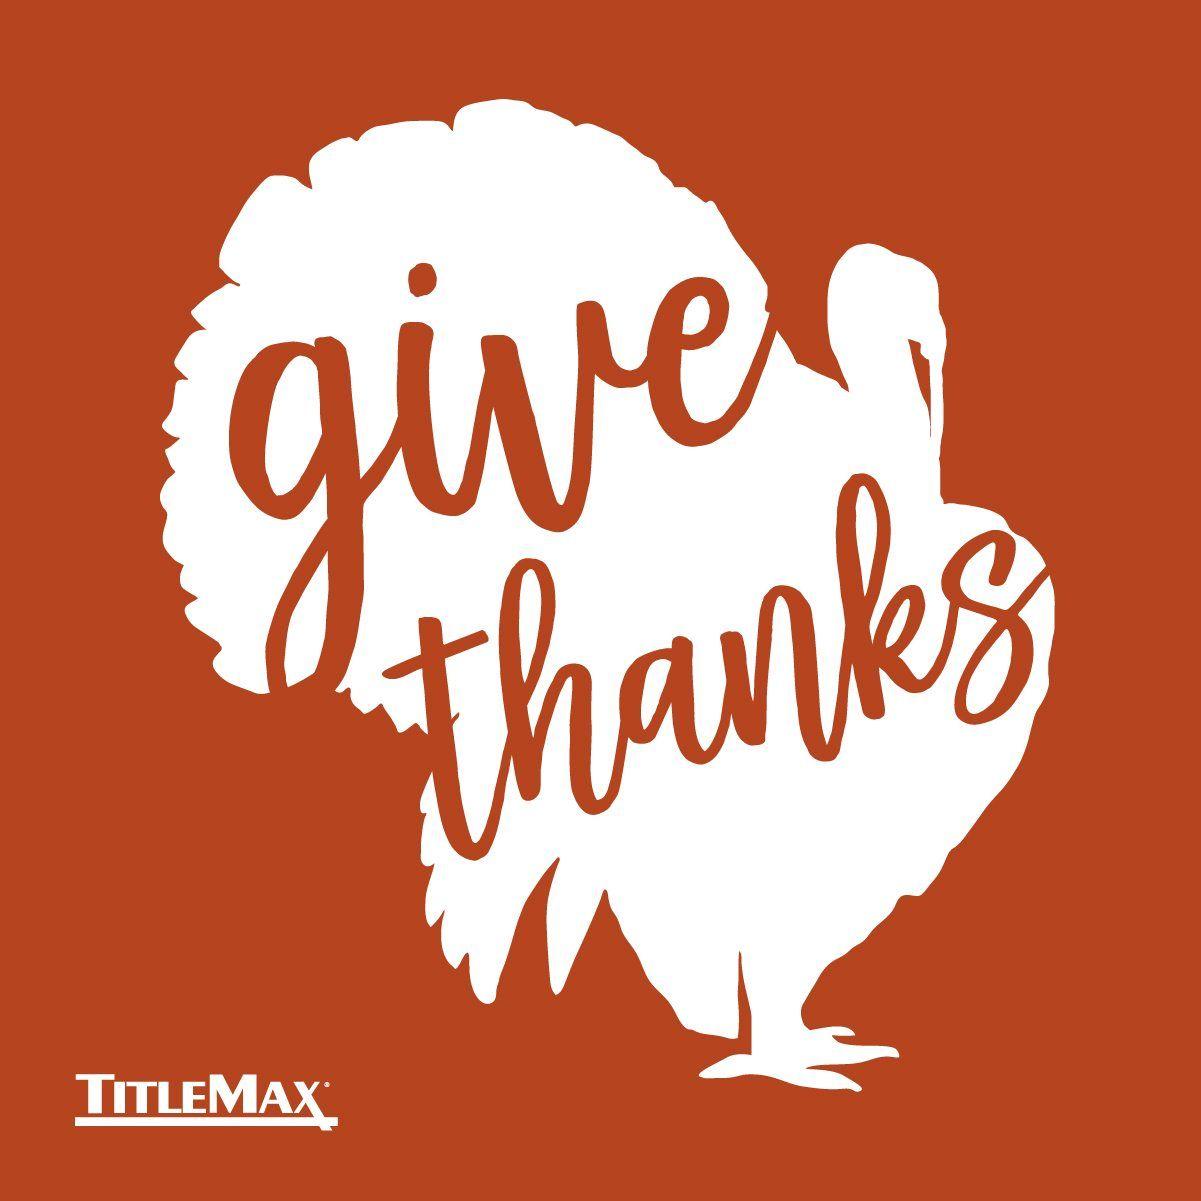 Title Max Logo - HAPPY THANKSGIVING FROM TITLEMAX!